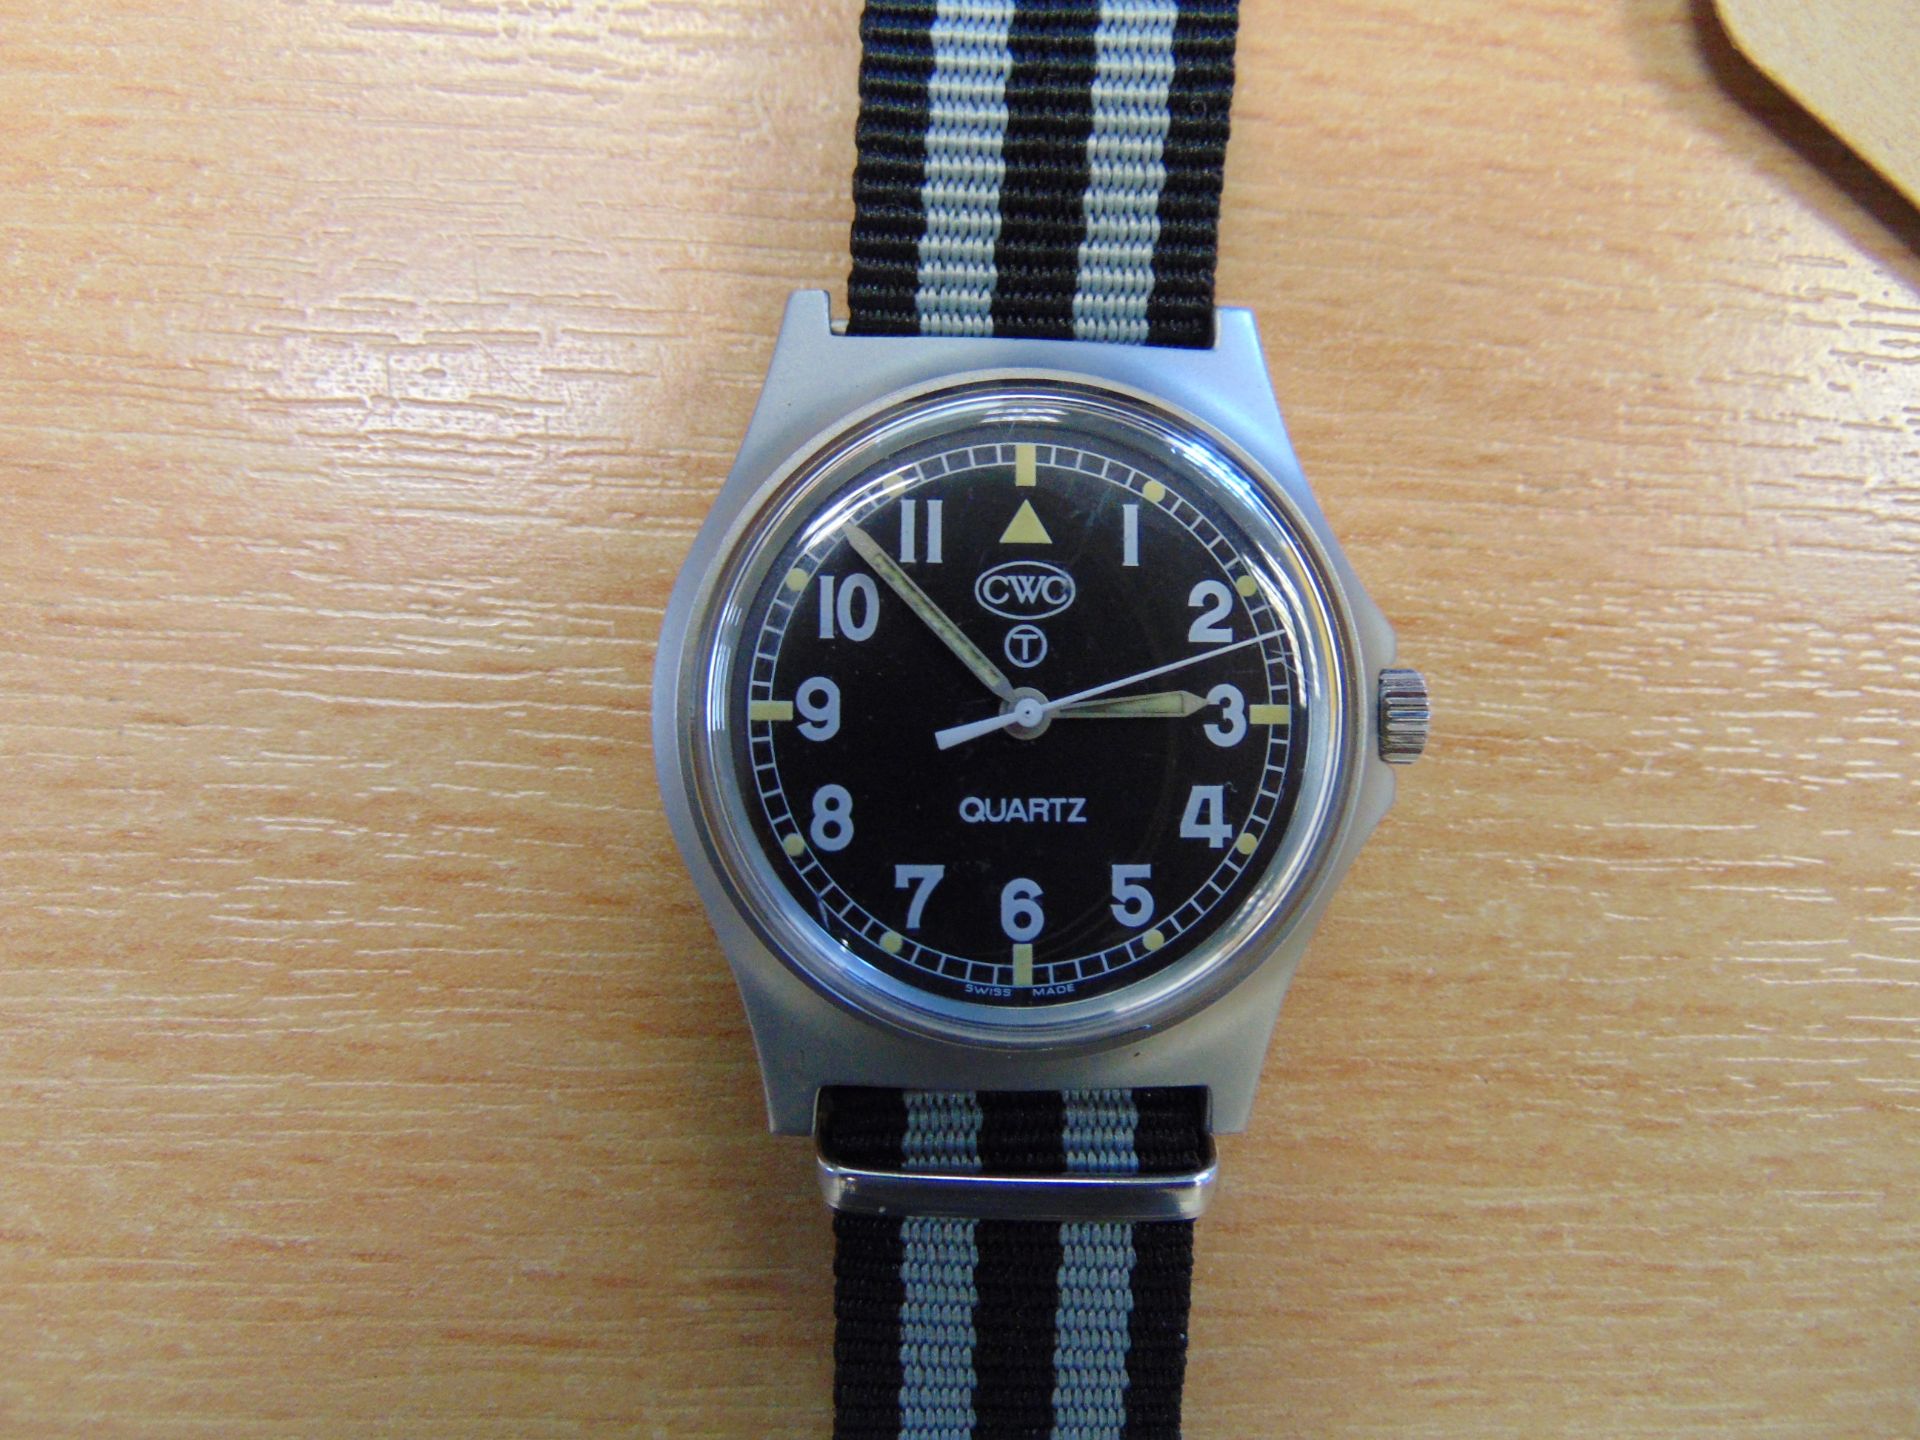 CWC W10 British Army Service Watch Unissued Condition, Water Resistant to 5ATM, Date 2005 - Image 2 of 6